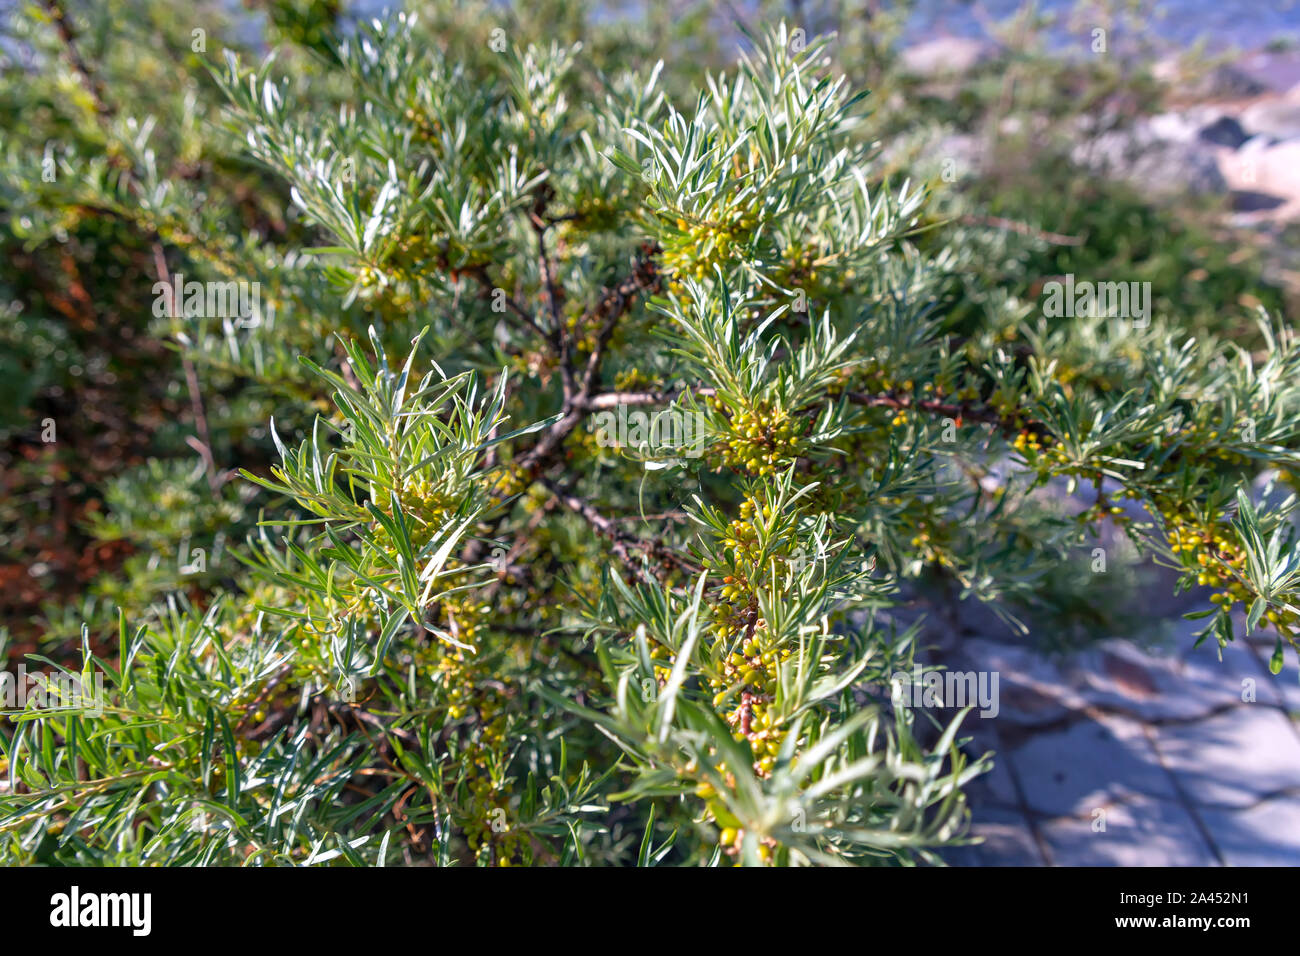 Sea-buckthorn bush with branches strewn with unripe fruits on Issyk-Kul Lake. Kyrgyzstan Stock Photo